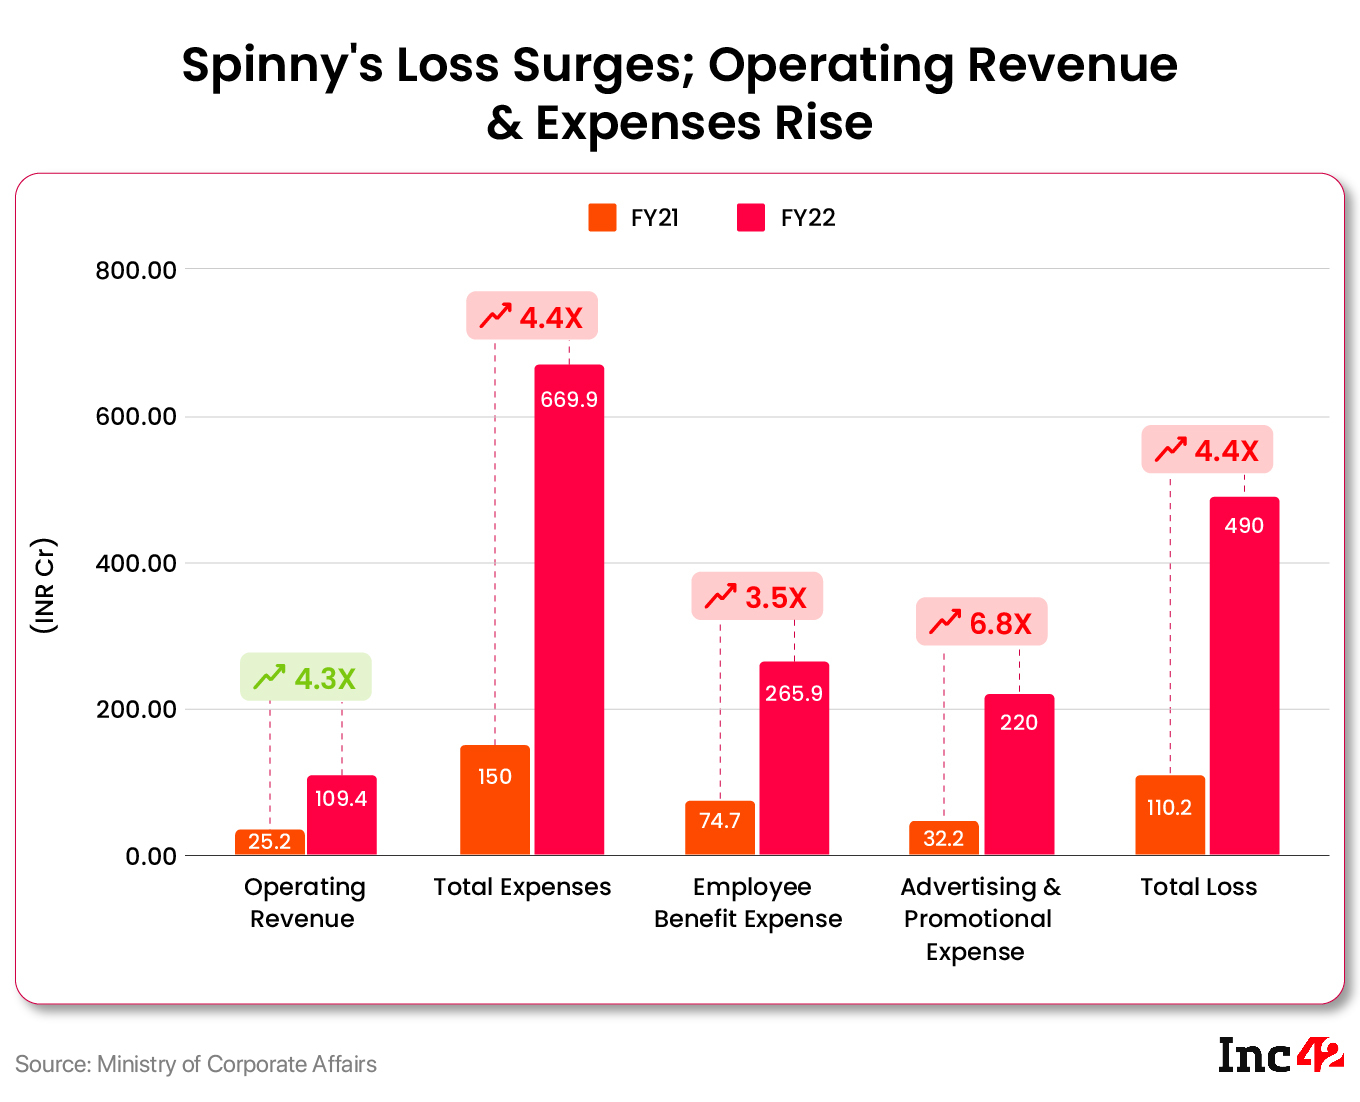 Spinny’s FY22 Loss Surges 4.4X to INR 220 Cr As Advertising Expenses Jump Over 580%